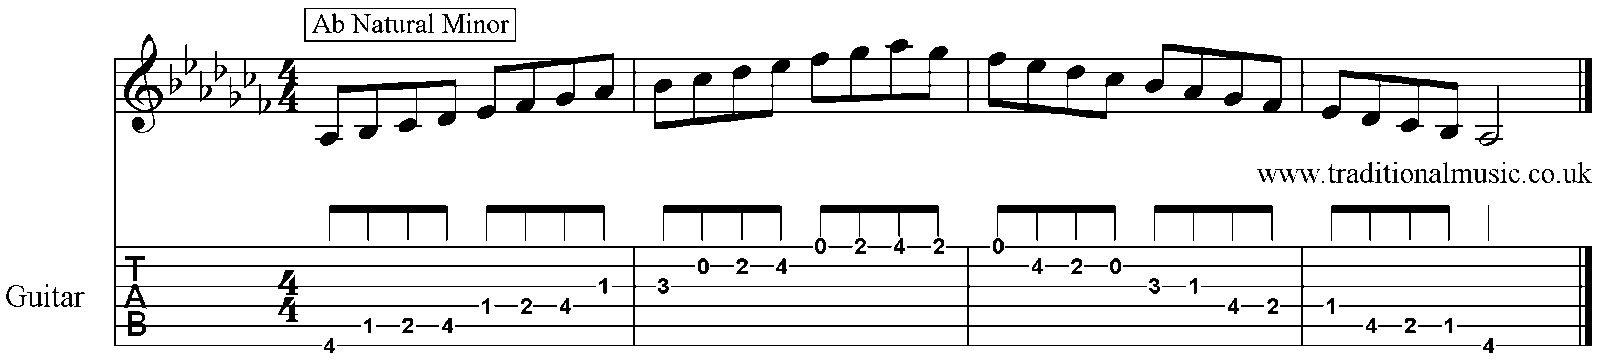 Minor Scales for Guitar Ab